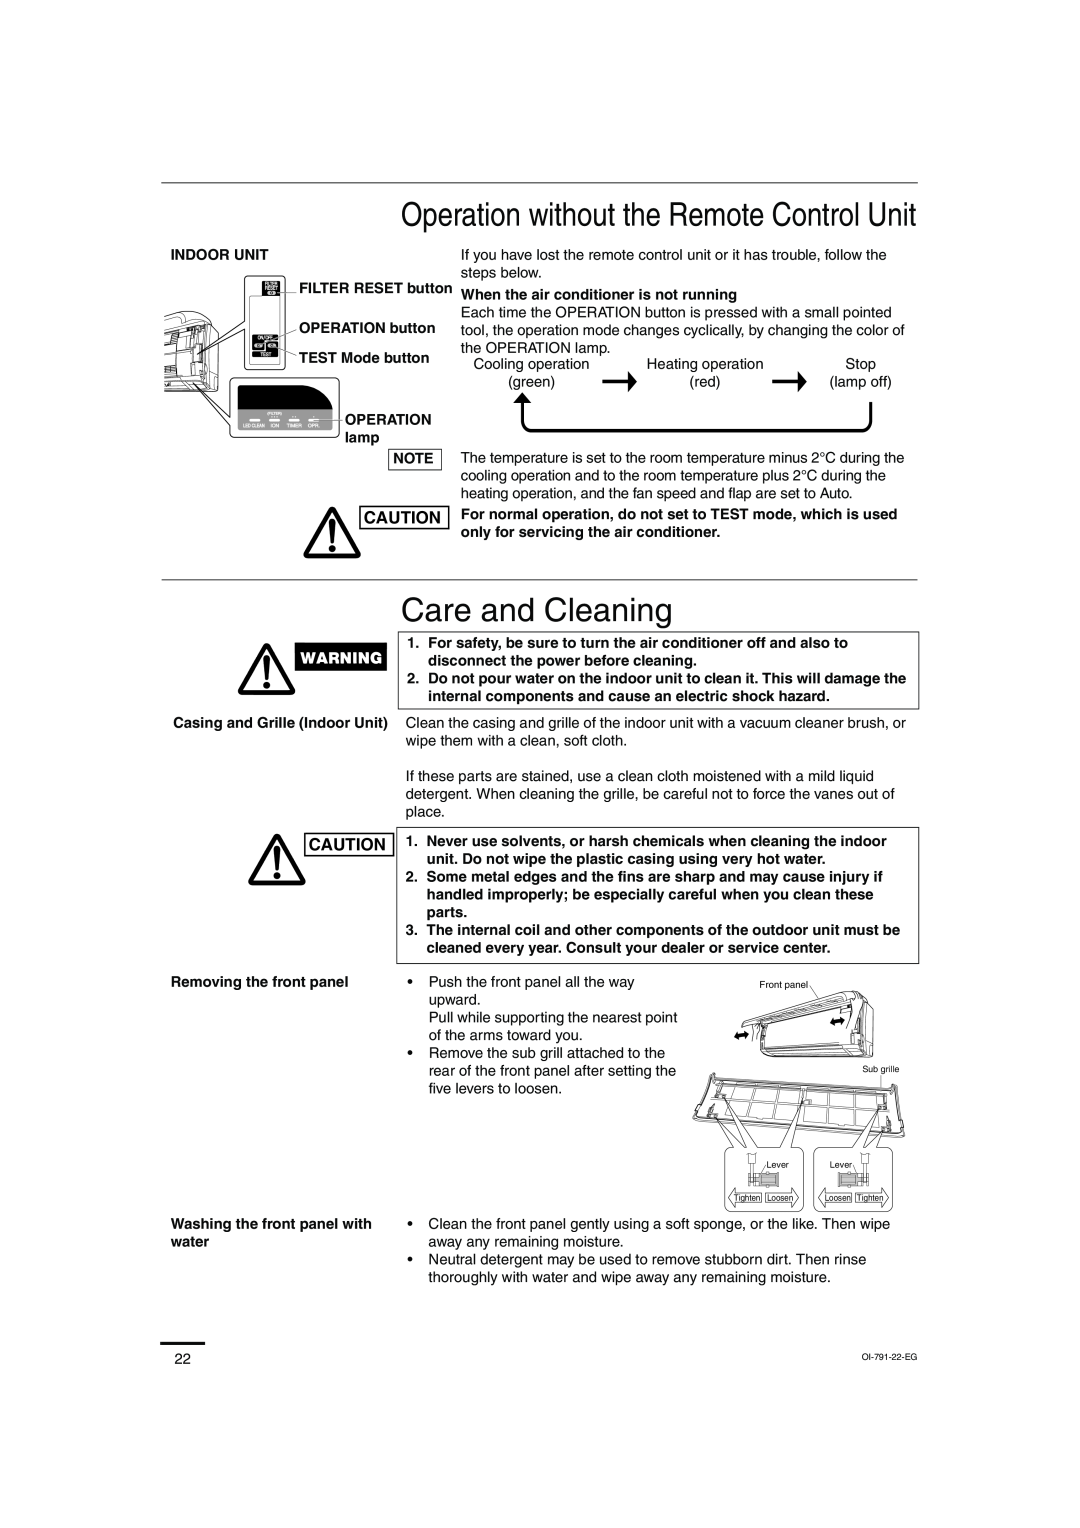 Sanyo SAP-KRV94EHDX service manual Care and Cleaning, Operation without the Remote Control Unit 